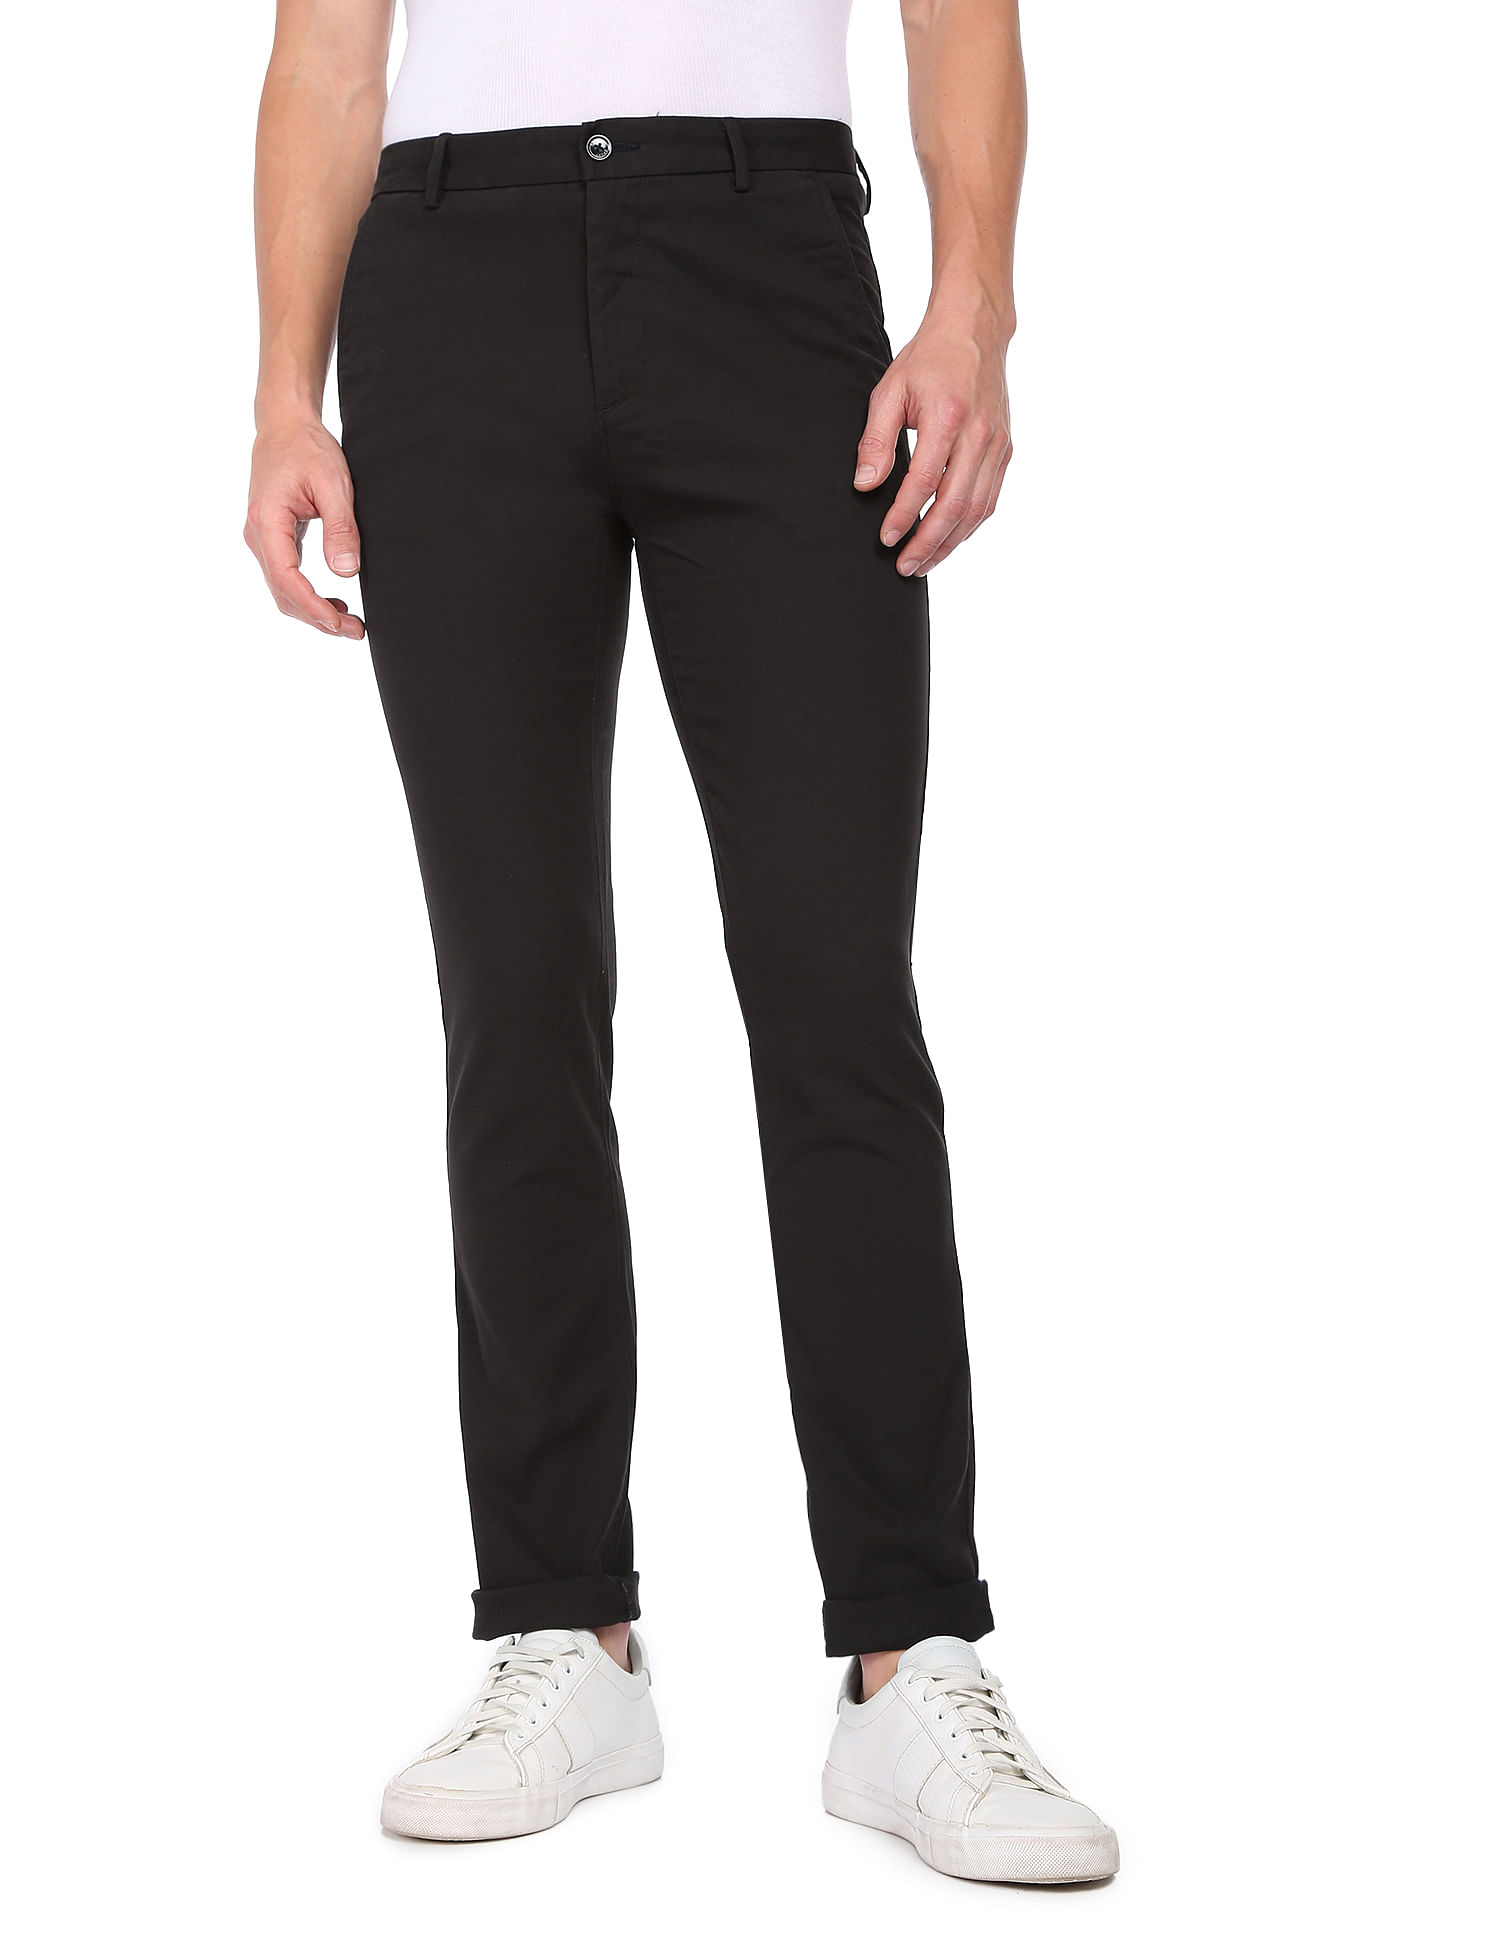 Pant Suit Trousers for MenSkinny Slim Fit Stretch India  Ubuy